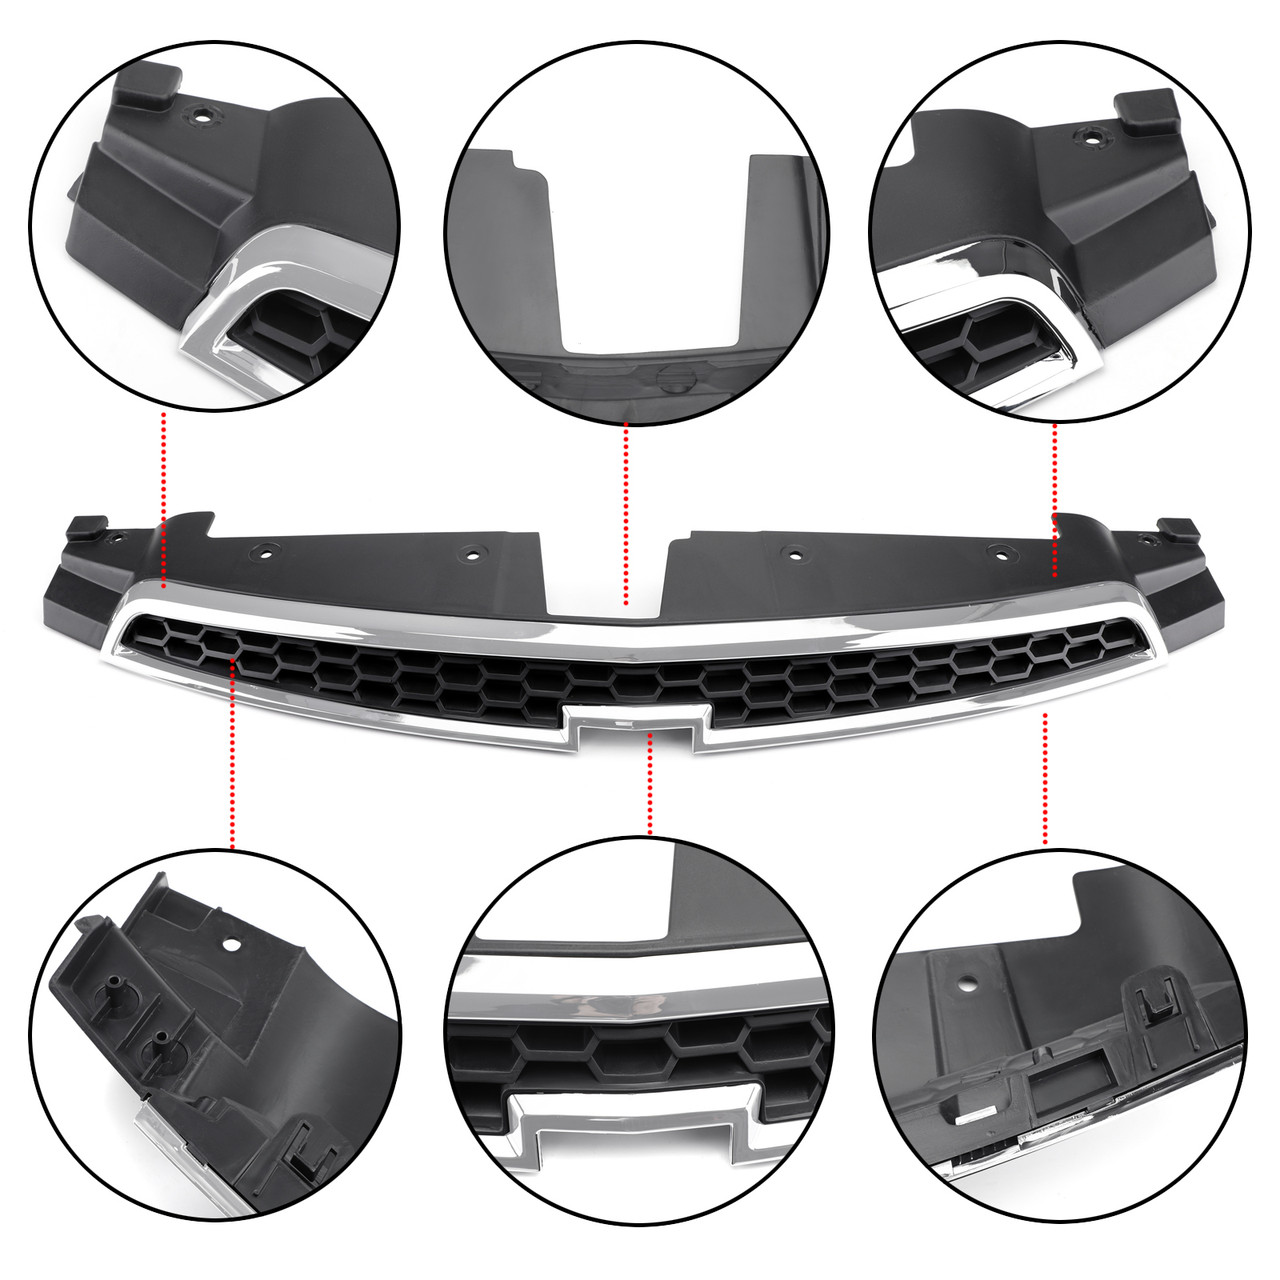 Front Upper Grill Inserts Trim Covers For Chevrolet Cruze 2009-2014 Black